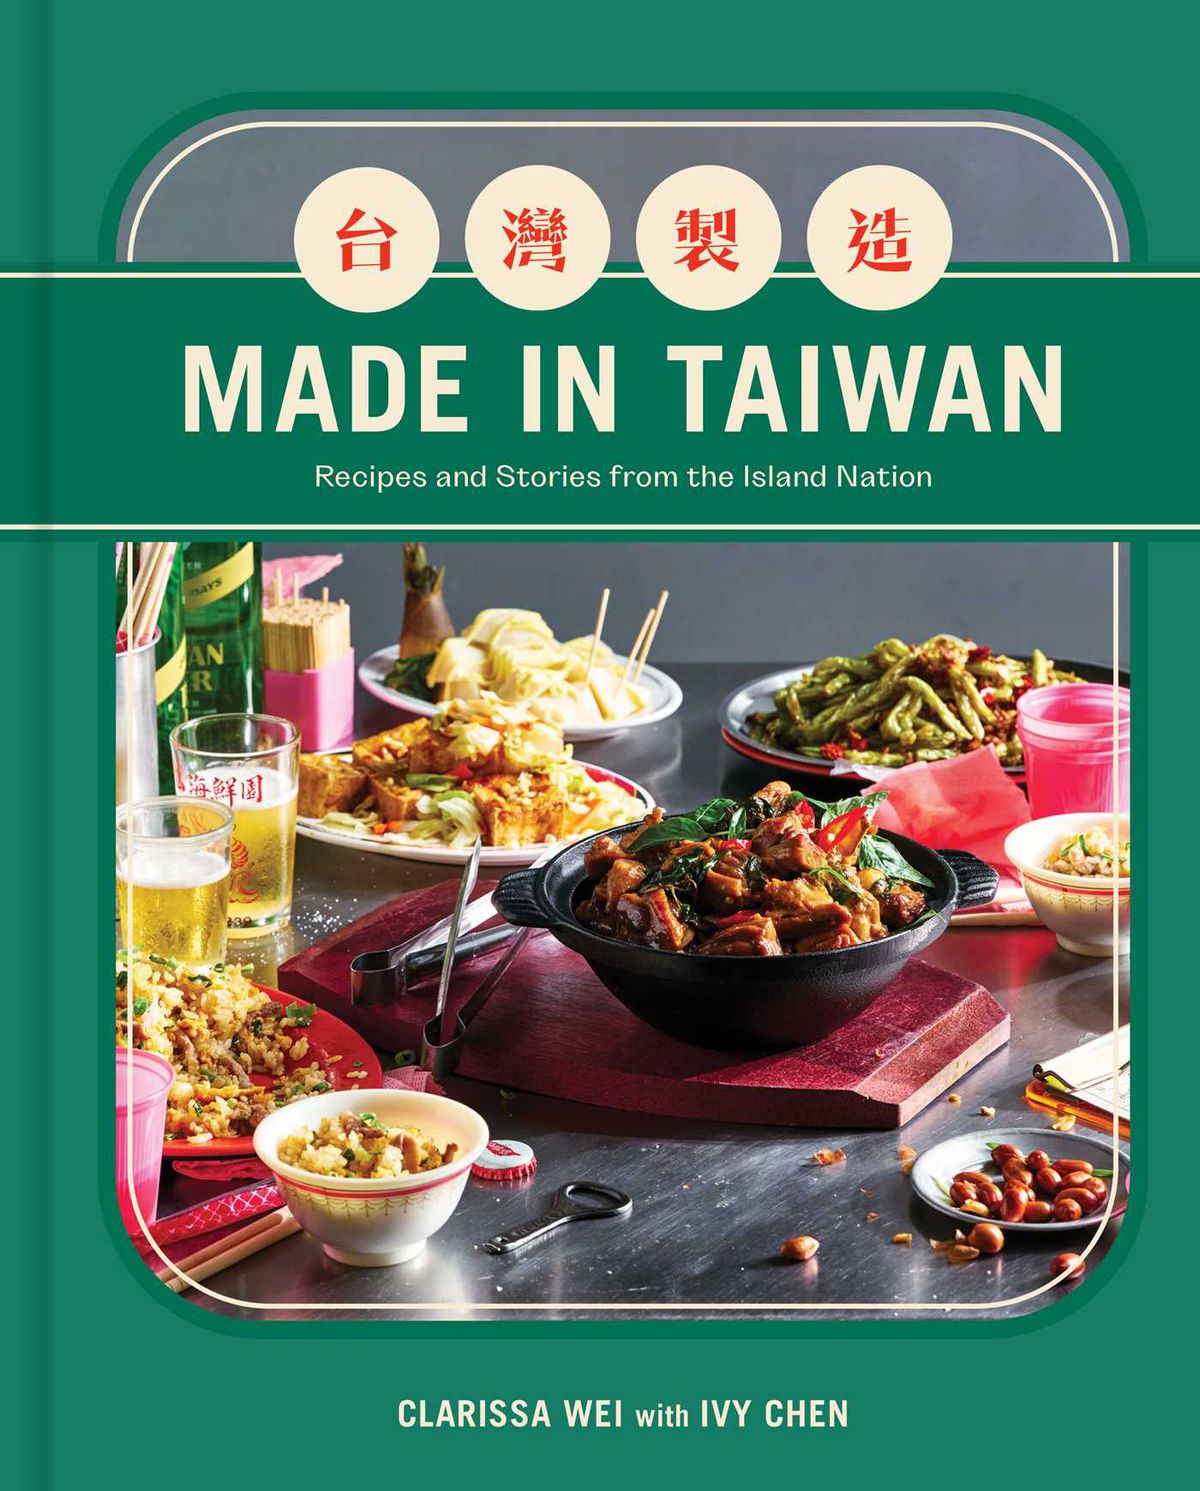 The cover of Clarissa Wei’s Made in Taiwan